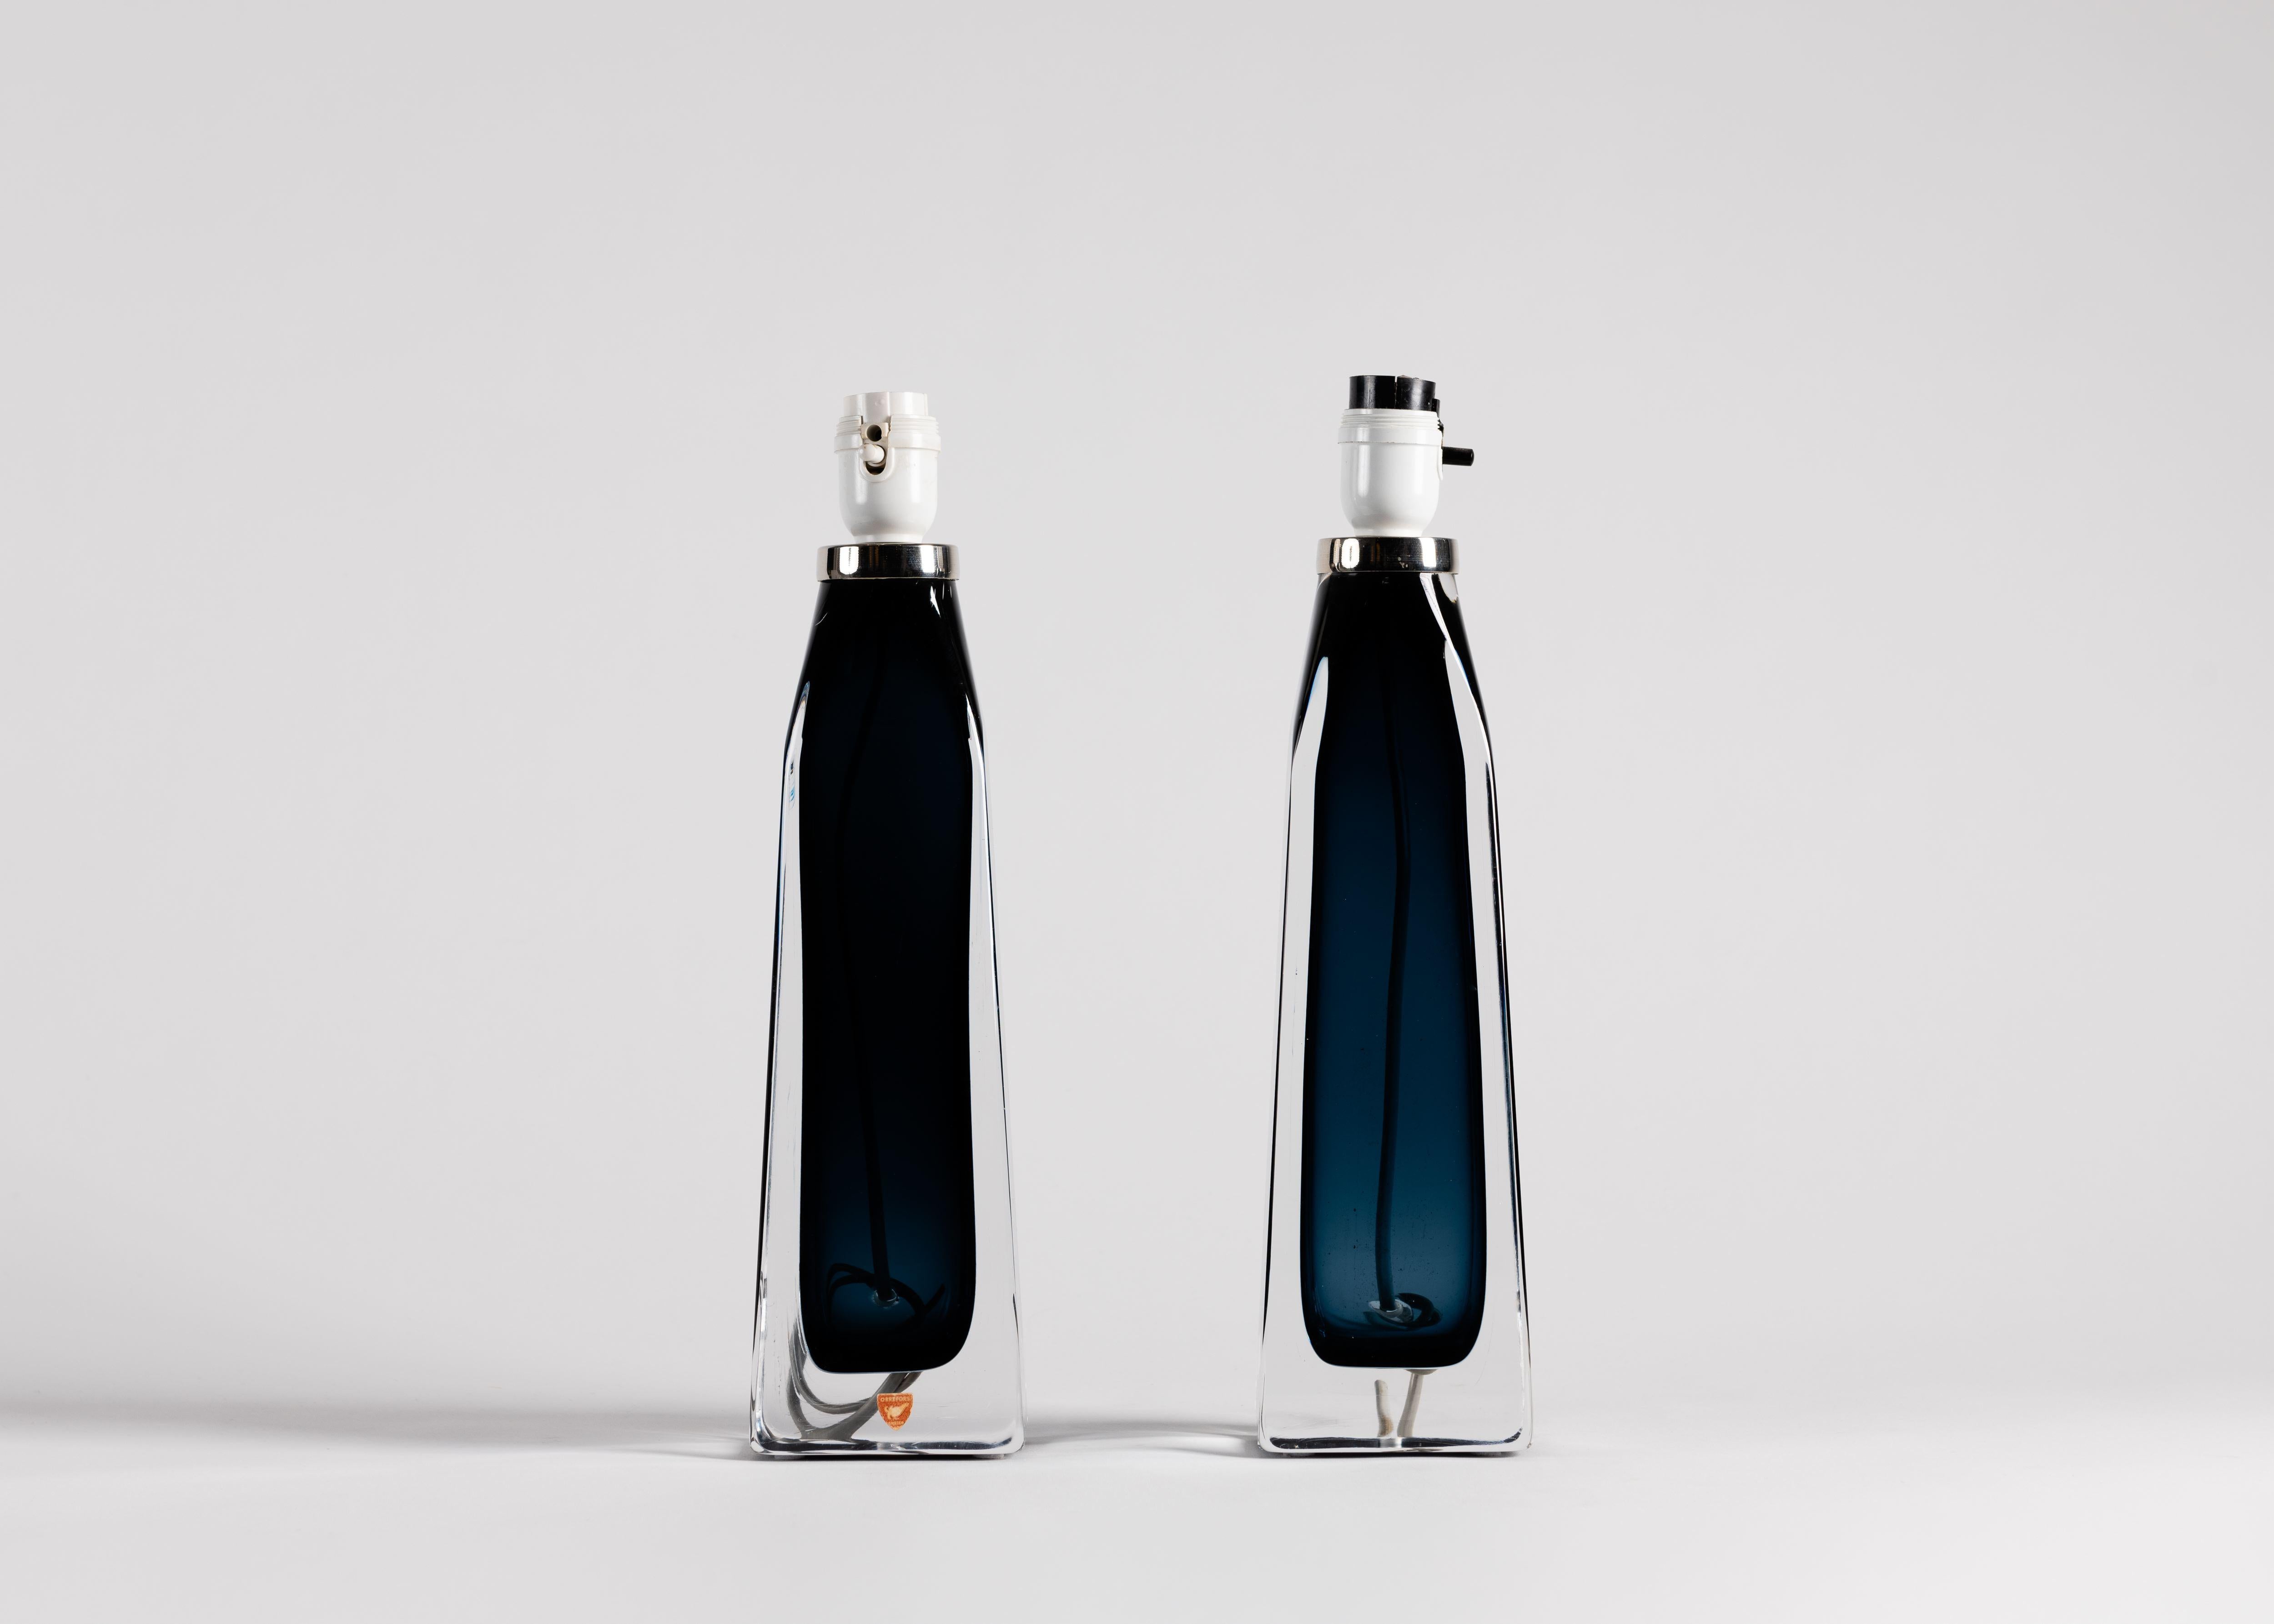 These sleek 1960s table lamps by Carl Fagerlund for Orrefors are made of glass, and contain a transparent substance that gives them their color.